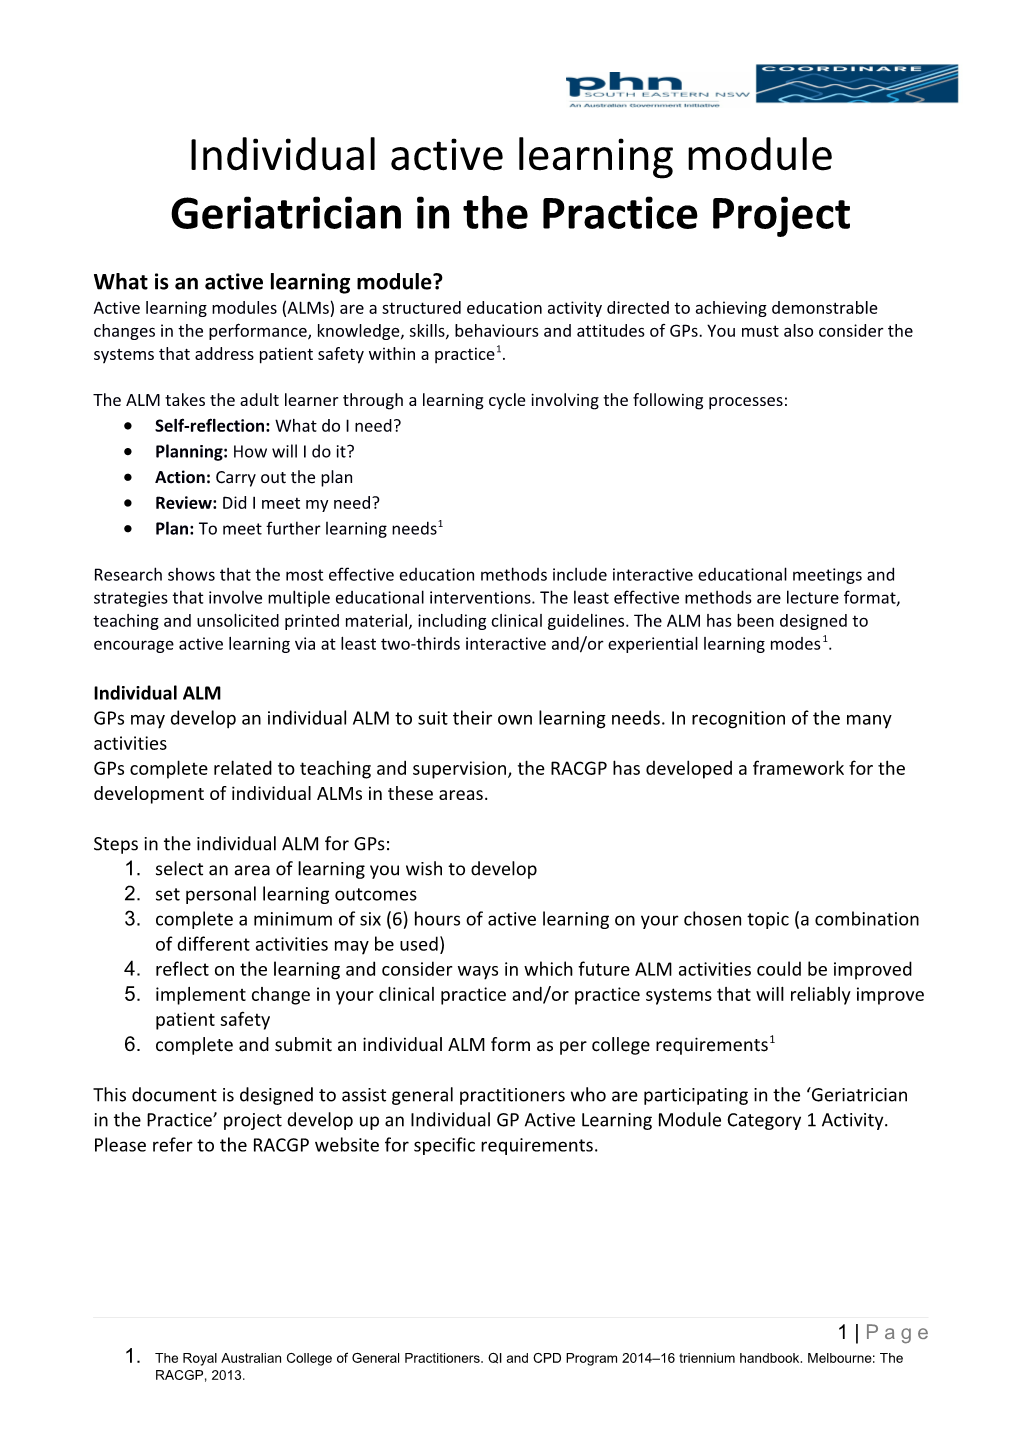 Geriatrician in the Practice Project